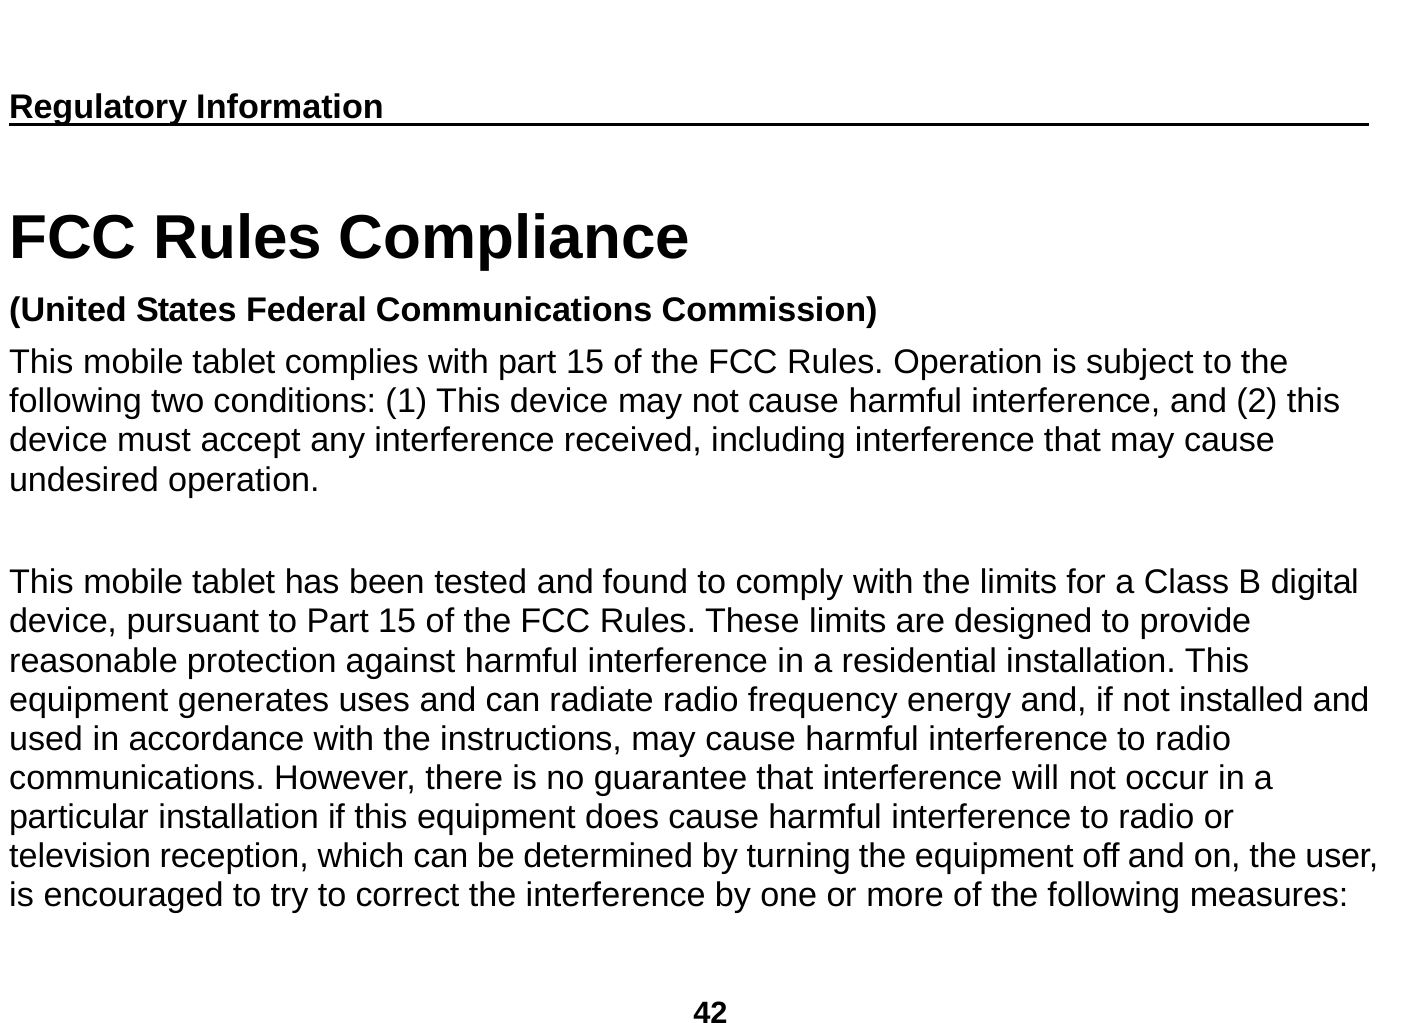  42  Regulatory Information                                                                       FCC Rules Compliance   (United States Federal Communications Commission) This mobile tablet complies with part 15 of the FCC Rules. Operation is subject to the following two conditions: (1) This device may not cause harmful interference, and (2) this device must accept any interference received, including interference that may cause undesired operation.  This mobile tablet has been tested and found to comply with the limits for a Class B digital device, pursuant to Part 15 of the FCC Rules. These limits are designed to provide reasonable protection against harmful interference in a residential installation. This equipment generates uses and can radiate radio frequency energy and, if not installed and used in accordance with the instructions, may cause harmful interference to radio communications. However, there is no guarantee that interference will not occur in a particular installation if this equipment does cause harmful interference to radio or television reception, which can be determined by turning the equipment off and on, the user, is encouraged to try to correct the interference by one or more of the following measures: 